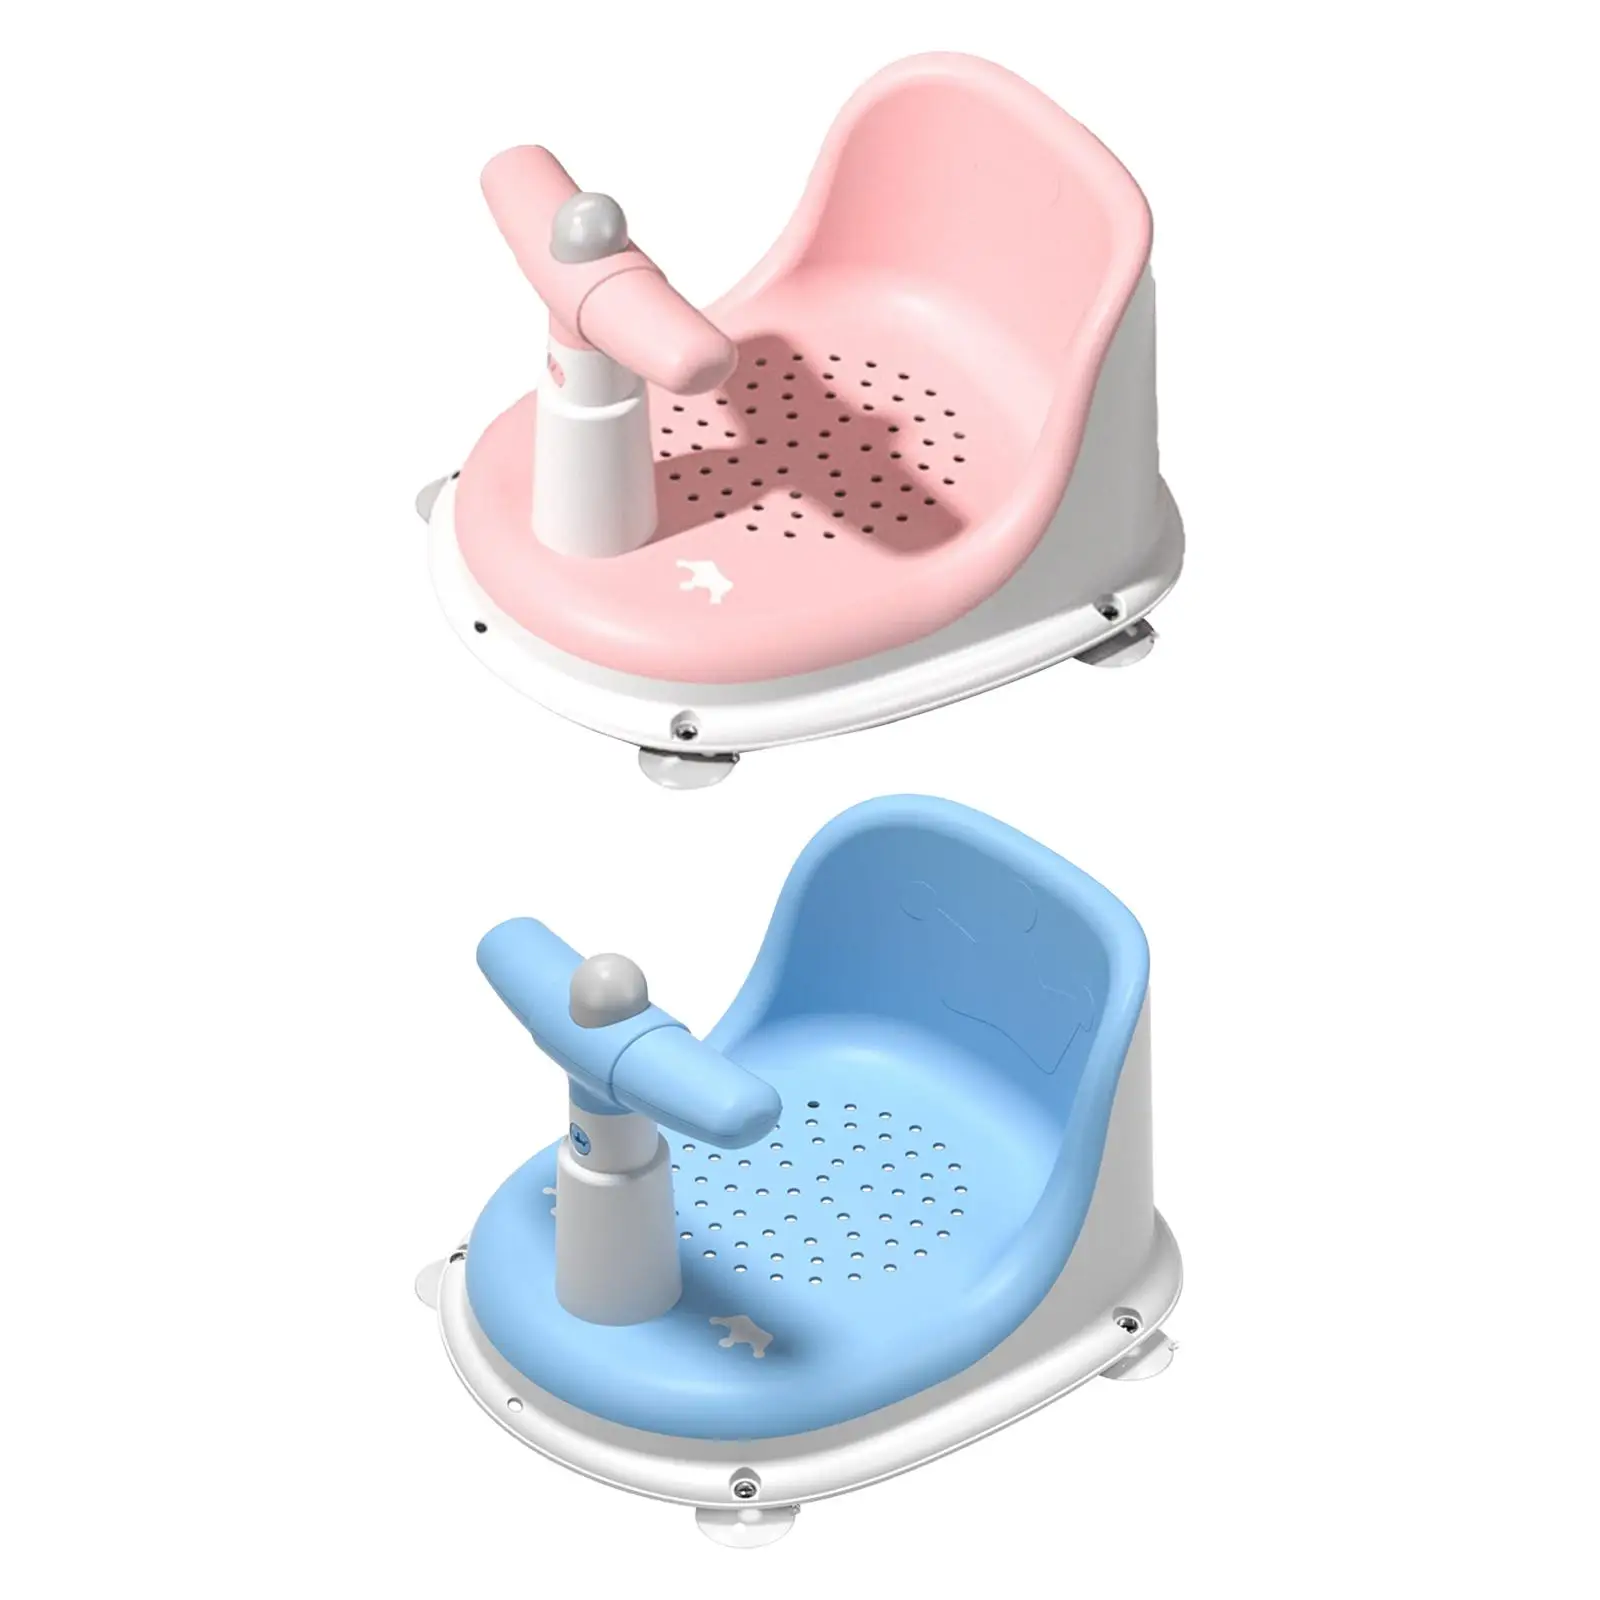 Baby Bathtub Seat Stable Foldable Comfortable Hanging Environmentally Friendly Soft Mat Baby Bath Seat for Home Bathroom Travel